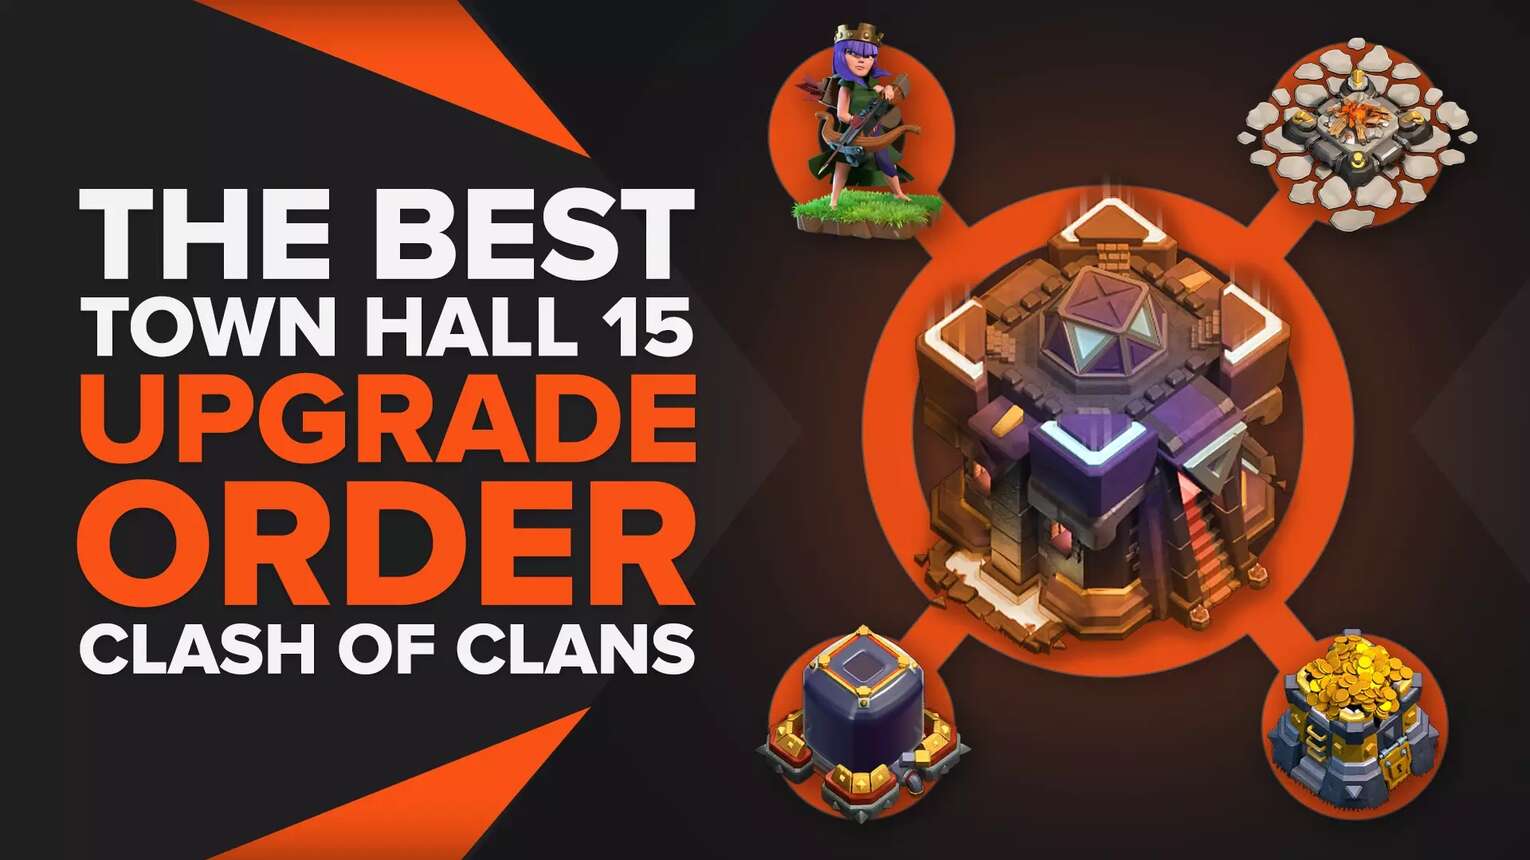 See The Best Town Hall 15 Upgrade Order In Clash Of Clans!